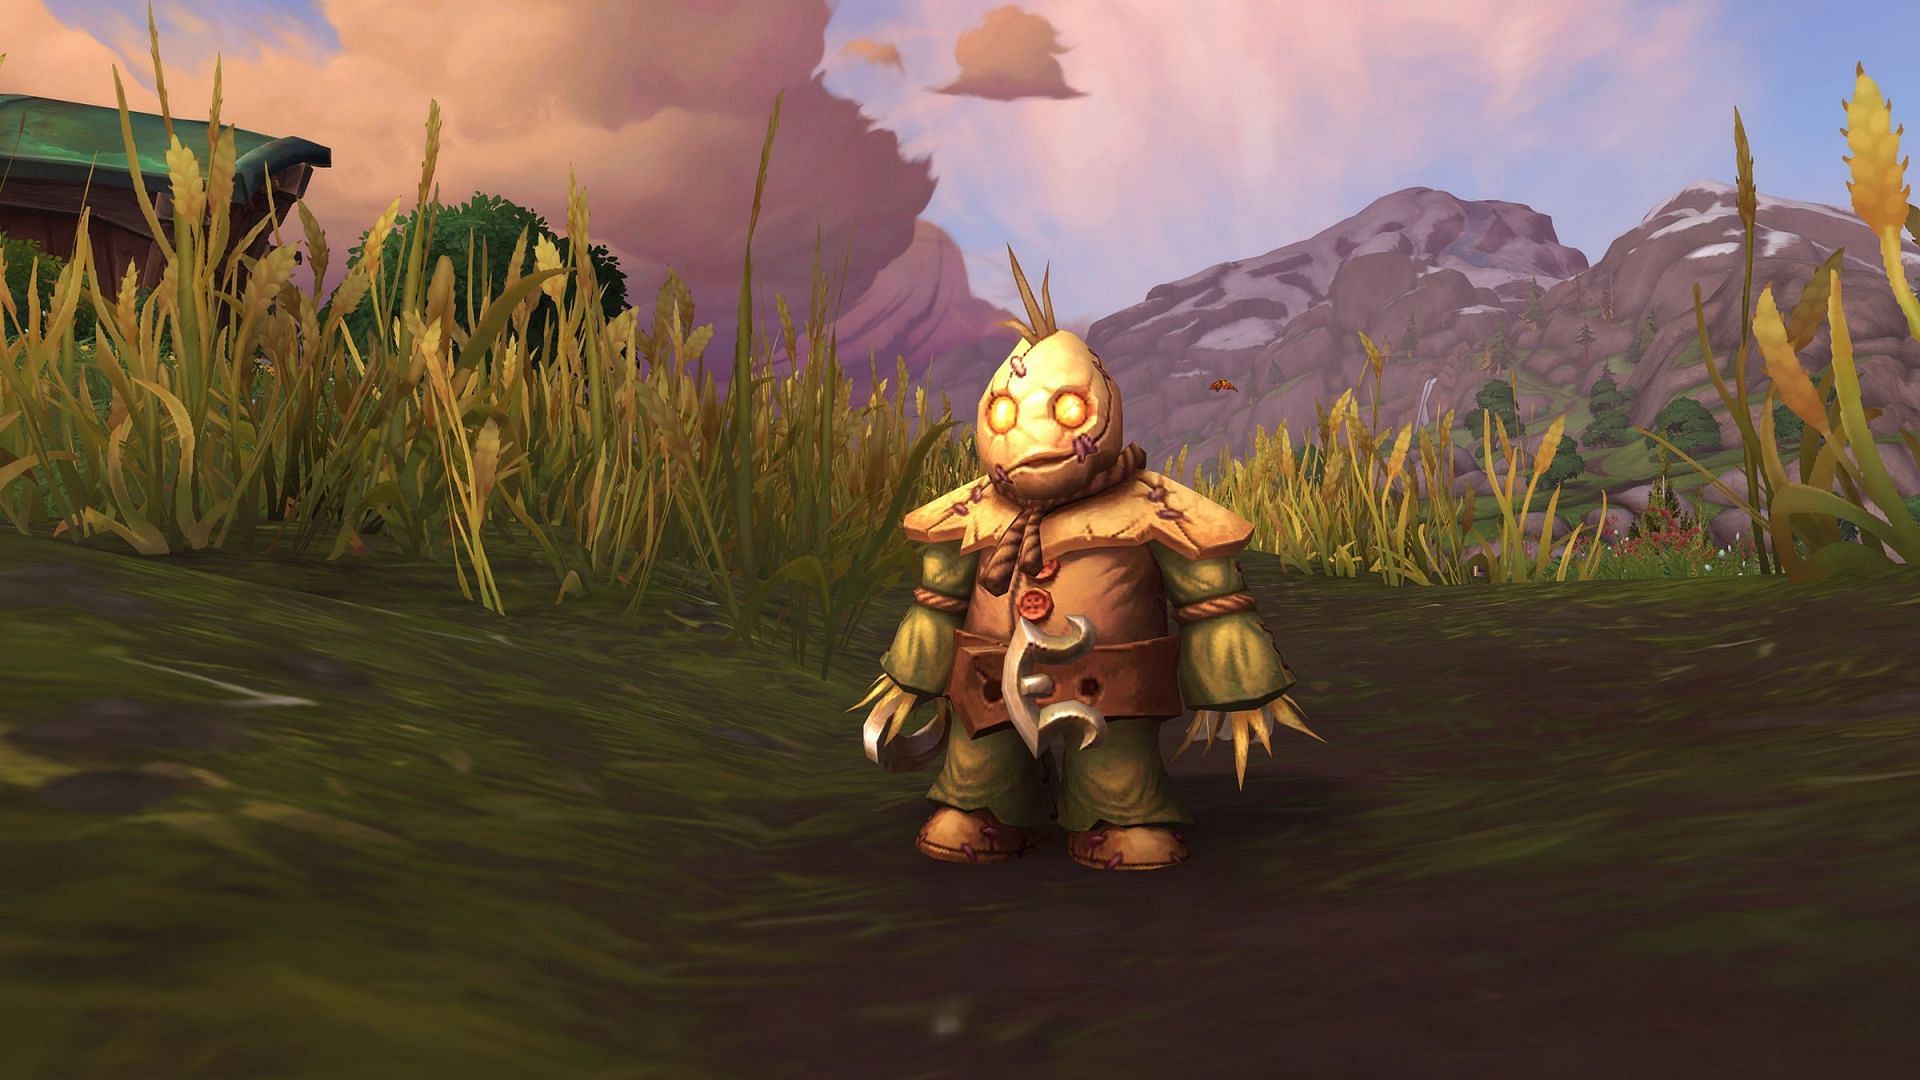 The Ichabod pet is available for a limited time in World of Warcraft (Image via Blizzard Entertainment)